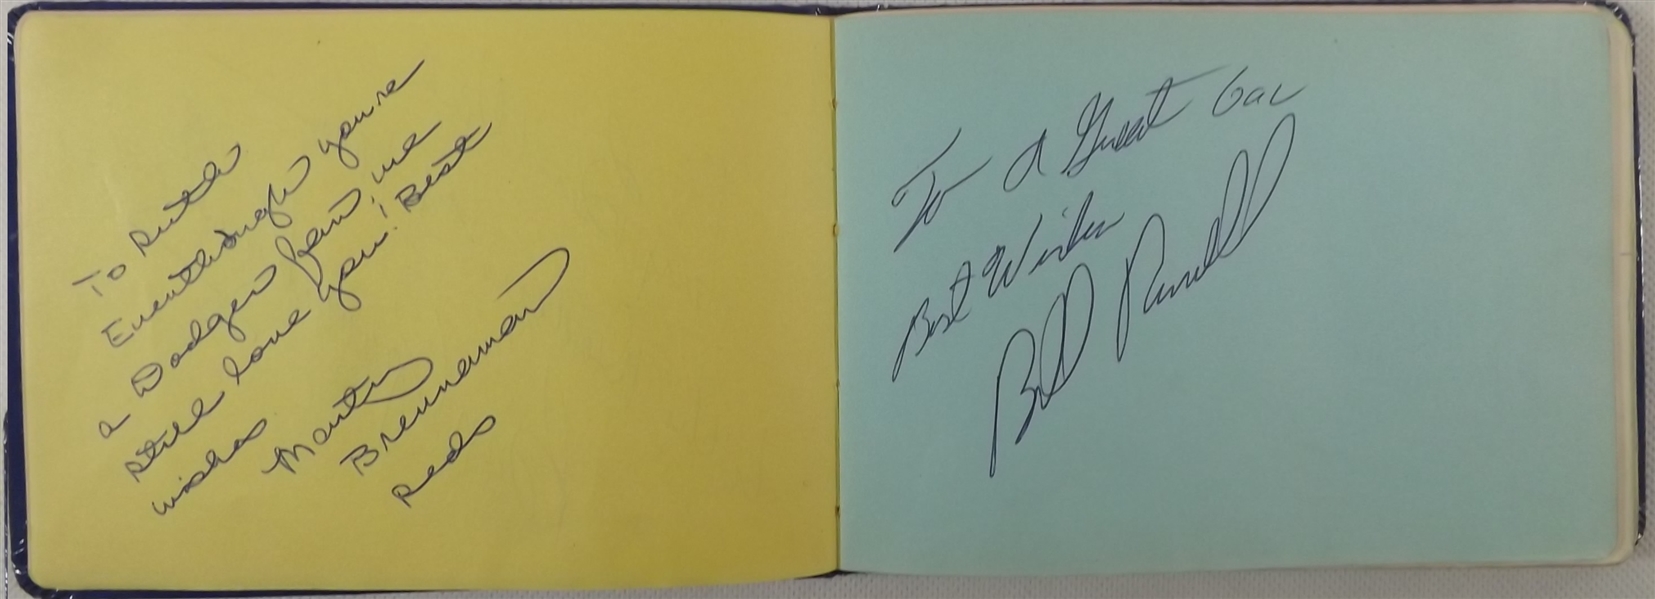 ---VINTAGE AUTOGRAPH BOOK FILLED WITH HOF'S KOUFAX ROBINSON GIBSON SUTTON BROCK & MORE